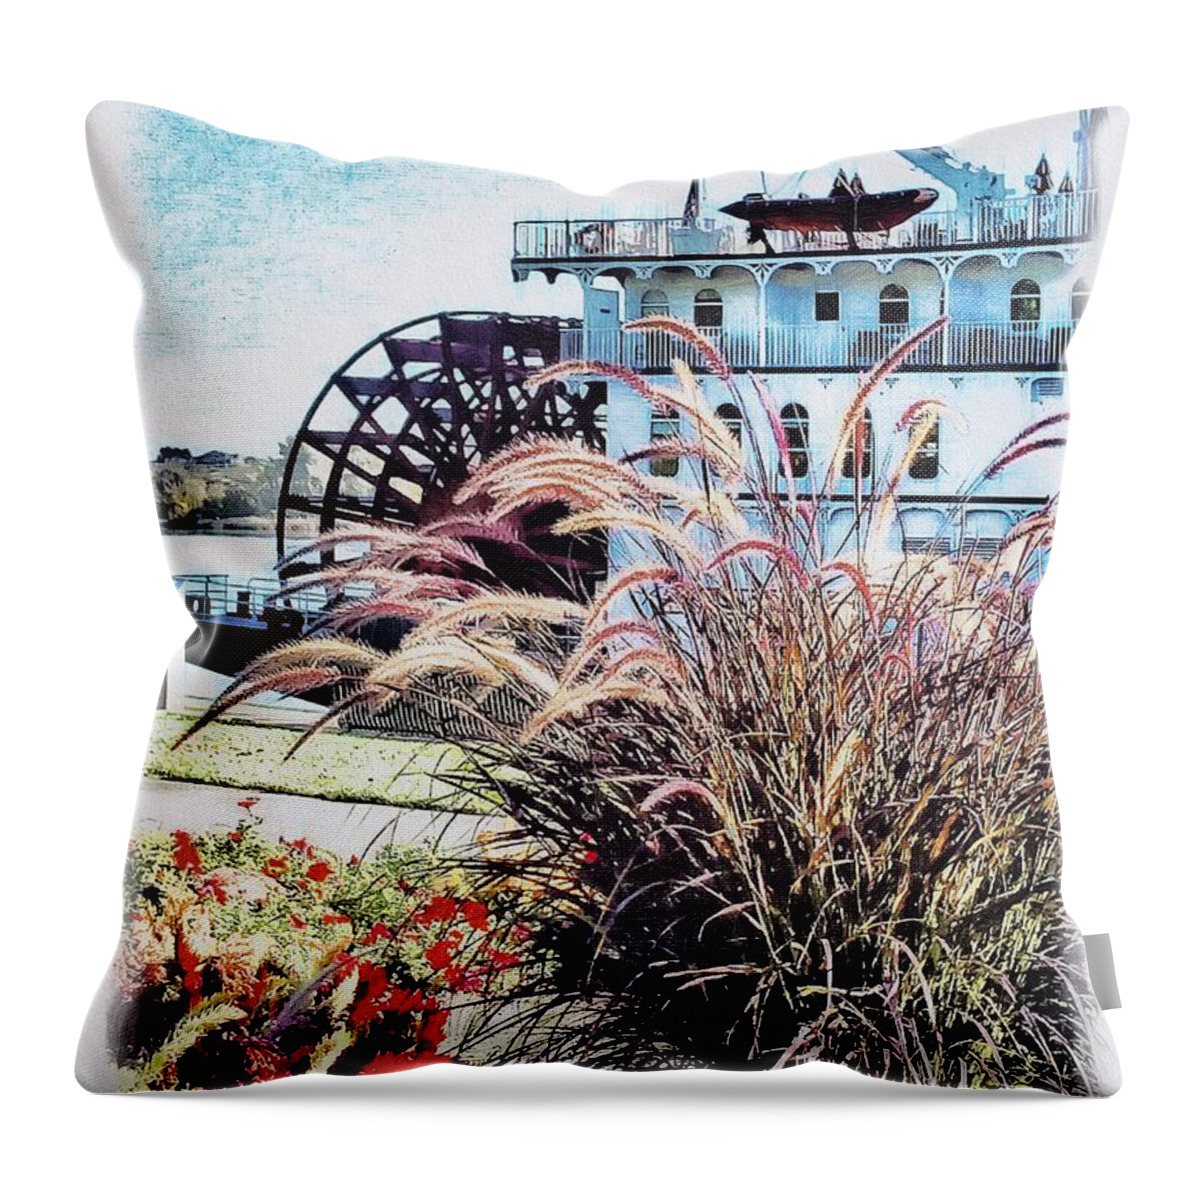 Paddleboat Sky Blue Water Wheel Brown Horsetails Beige Plant Lifeboat Cabins Deck White Sketch Red Flowers Black Throw Pillow featuring the digital art American Express Paddleboat 2015 by Kathleen Boyles